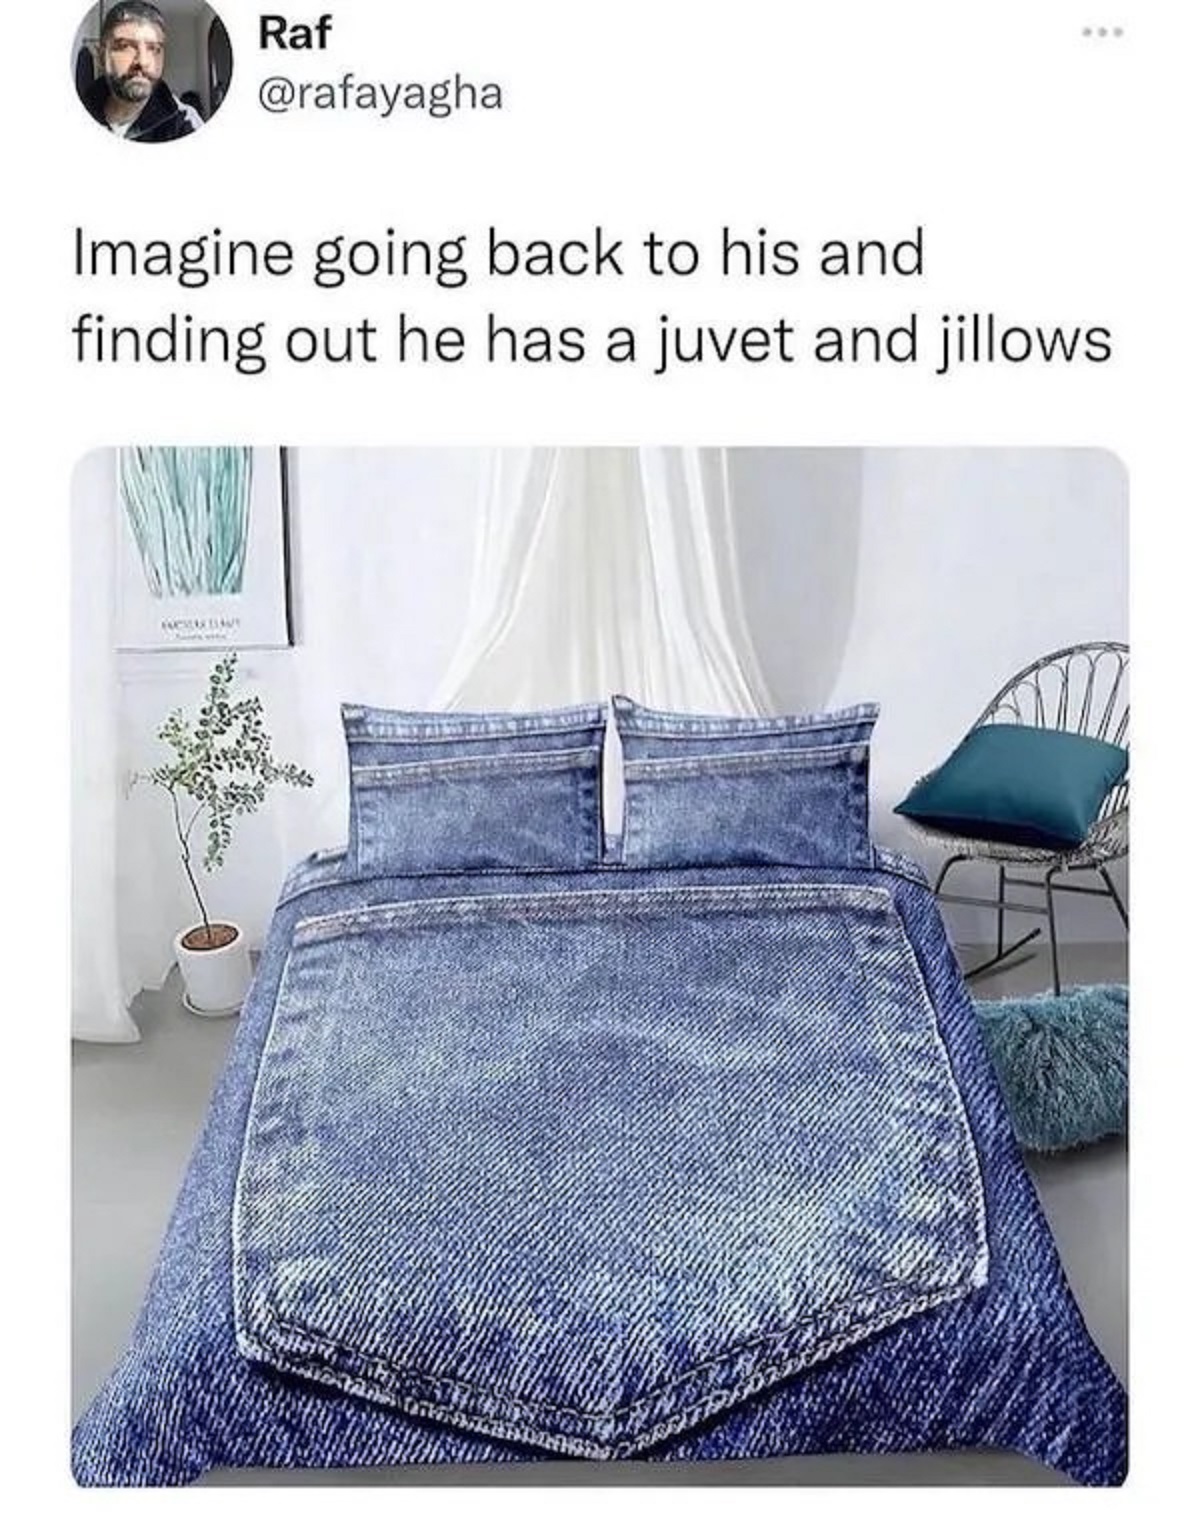 juvet meme - Raf Imagine going back to his and finding out he has a juvet and jillows Tre